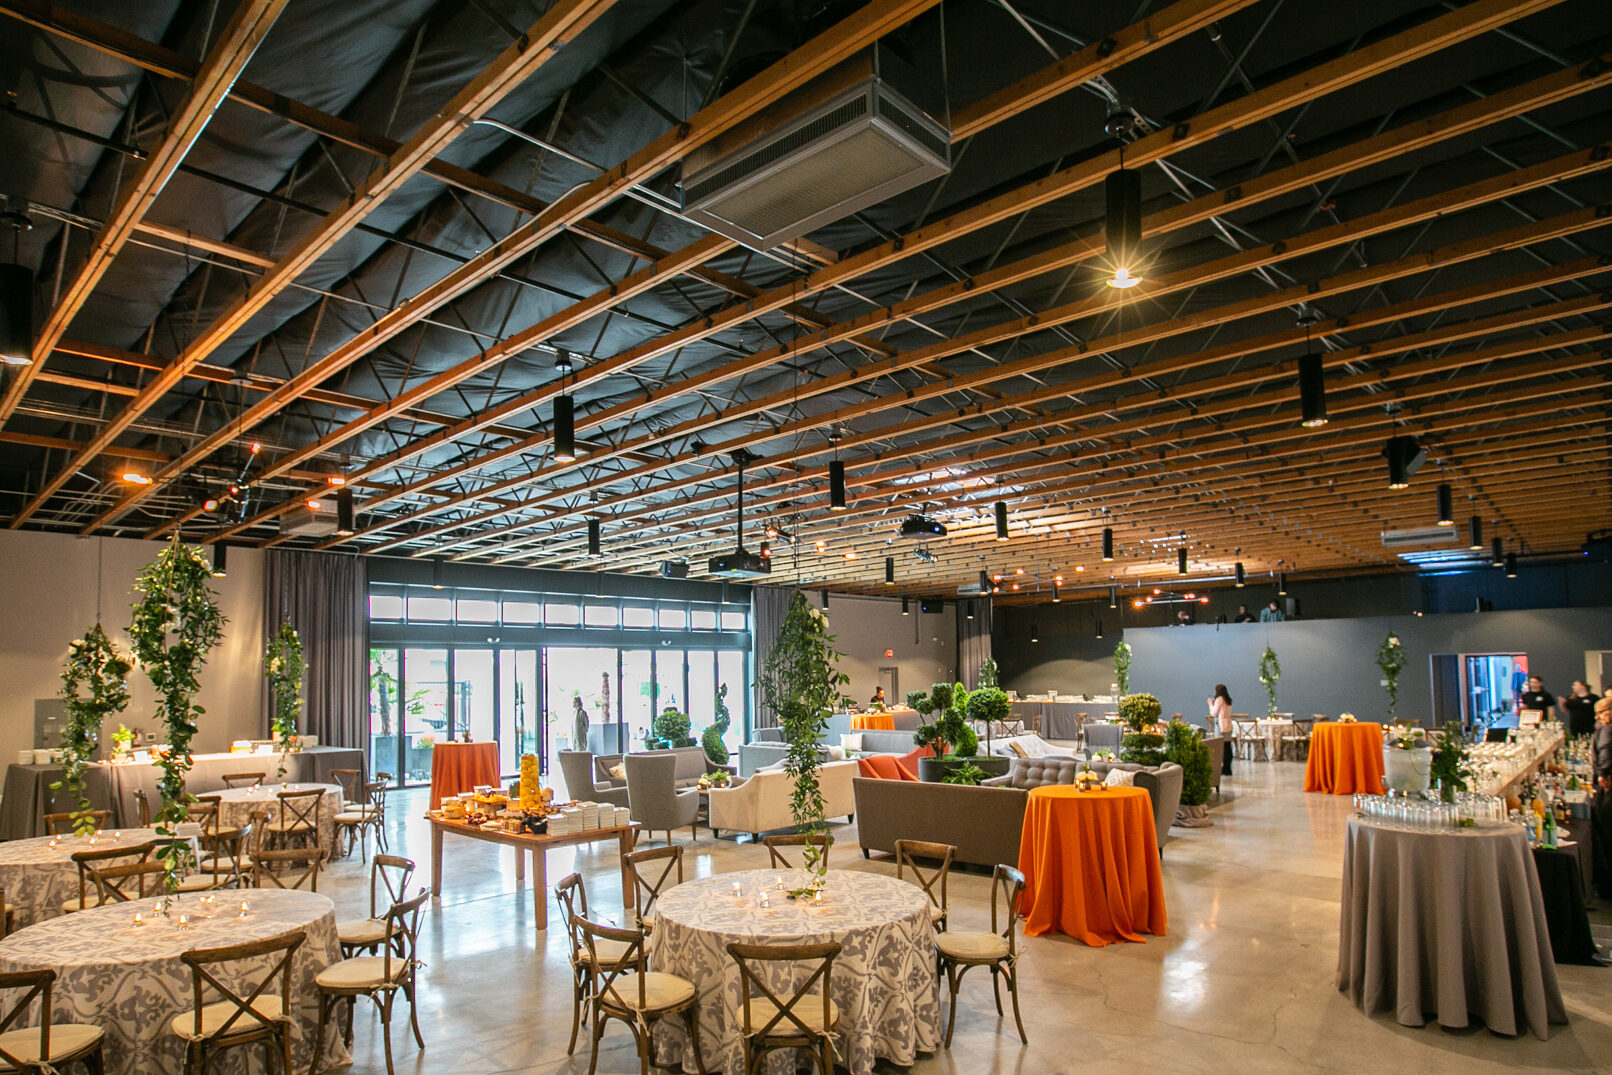 Large venue space with dining tables with orange table cloth